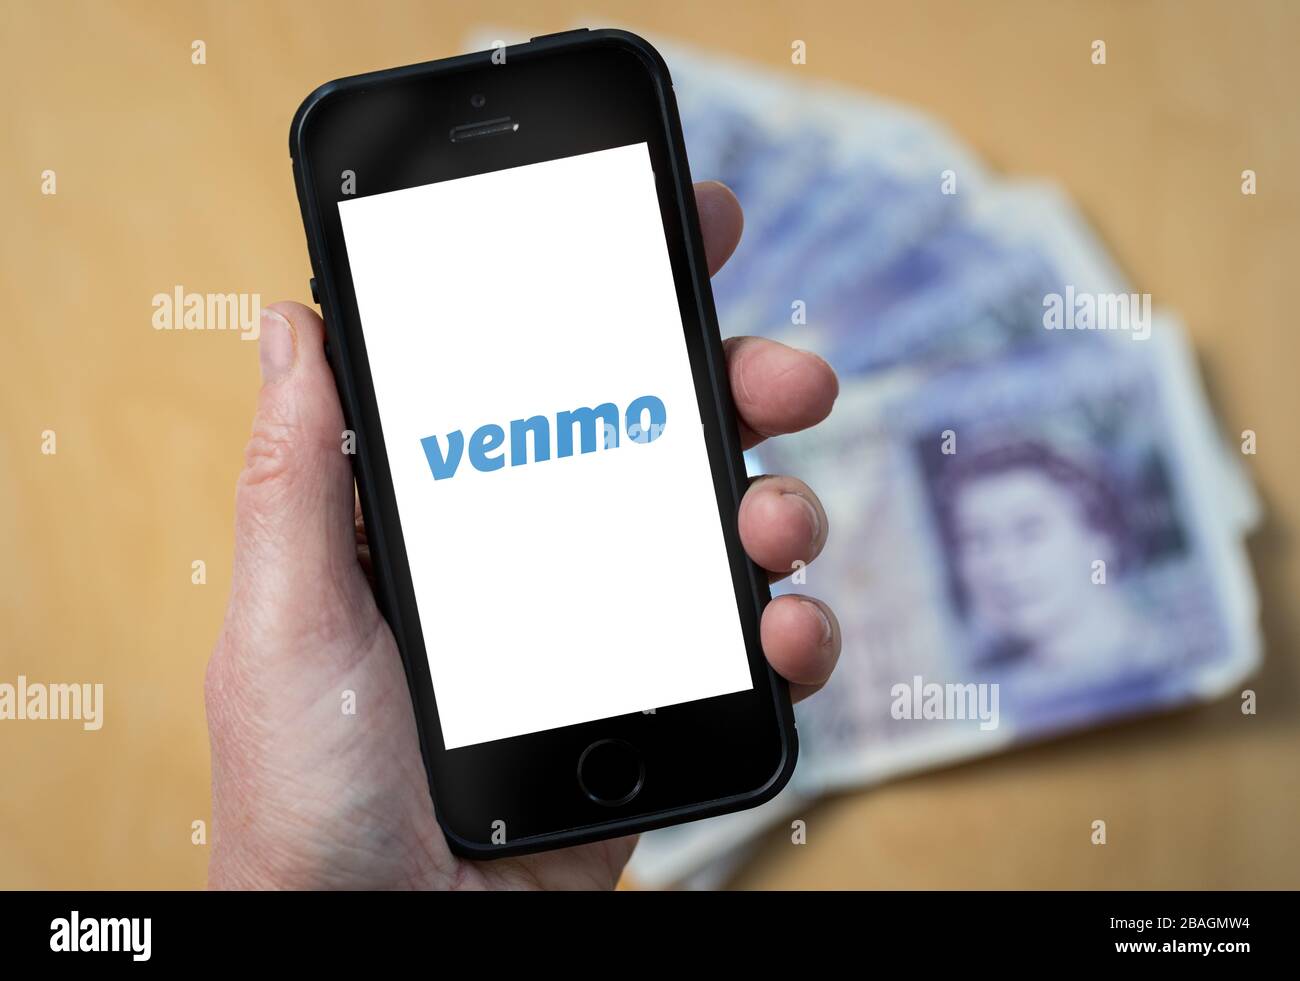 A woman looking at the Venmo mobile payment company logo on a mobile phone. (editorial Use Only) Stock Photo